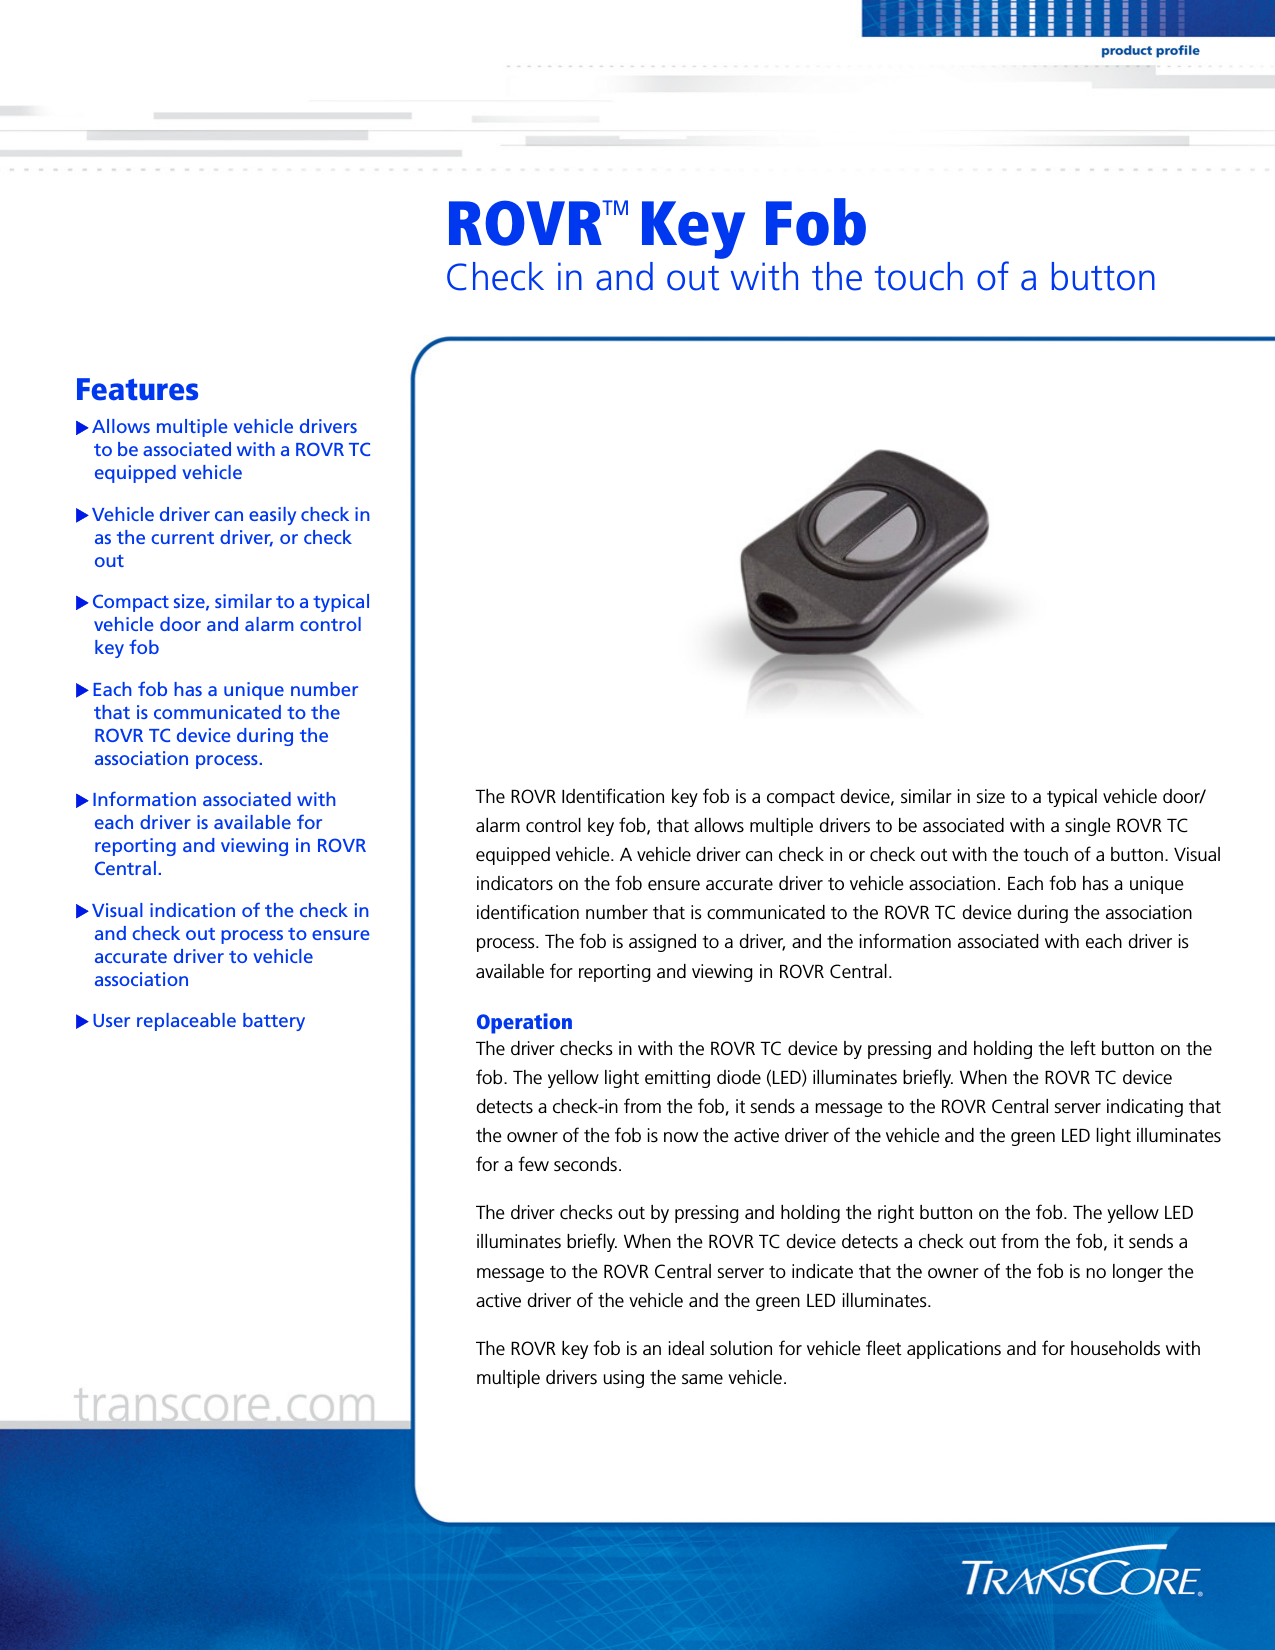 ROVR   Key FobCheck in and out with the touch of a buttonFeaturesAllows multiple vehicle drivers to be associated with a ROVR TC equipped vehicleVehicle driver can easily check in as the current driver, or check outCompact size, similar to a typical vehicle door and alarm control key fobEach fob has a unique number that is communicated to the ROVR TC device during the association process.Information associated with each driver is available for reporting and viewing in ROVR Central. Visual indication of the check in and check out process to ensure accurate driver to vehicle associationUser replaceable batteryThe ROVR Identification key fob is a compact device, similar in size to a typical vehicle door/alarm control key fob, that allows multiple drivers to be associated with a single ROVR TC equipped vehicle. A vehicle driver can check in or check out with the touch of a button. Visual indicators on the fob ensure accurate driver to vehicle association. Each fob has a unique identification number that is communicated to the ROVR TC device during the association process. The fob is assigned to a driver, and the information associated with each driver is available for reporting and viewing in ROVR Central. OperationThe driver checks in with the ROVR TC device by pressing and holding the left button on the fob. The yellow light emitting diode (LED) illuminates briefly. When the ROVR TC device detects a check-in from the fob, it sends a message to the ROVR Central server indicating that the owner of the fob is now the active driver of the vehicle and the green LED light illuminates for a few seconds.The driver checks out by pressing and holding the right button on the fob. The yellow LED illuminates briefly. When the ROVR TC device detects a check out from the fob, it sends a message to the ROVR Central server to indicate that the owner of the fob is no longer the active driver of the vehicle and the green LED illuminates.The ROVR key fob is an ideal solution for vehicle fleet applications and for households with multiple drivers using the same vehicle.TM